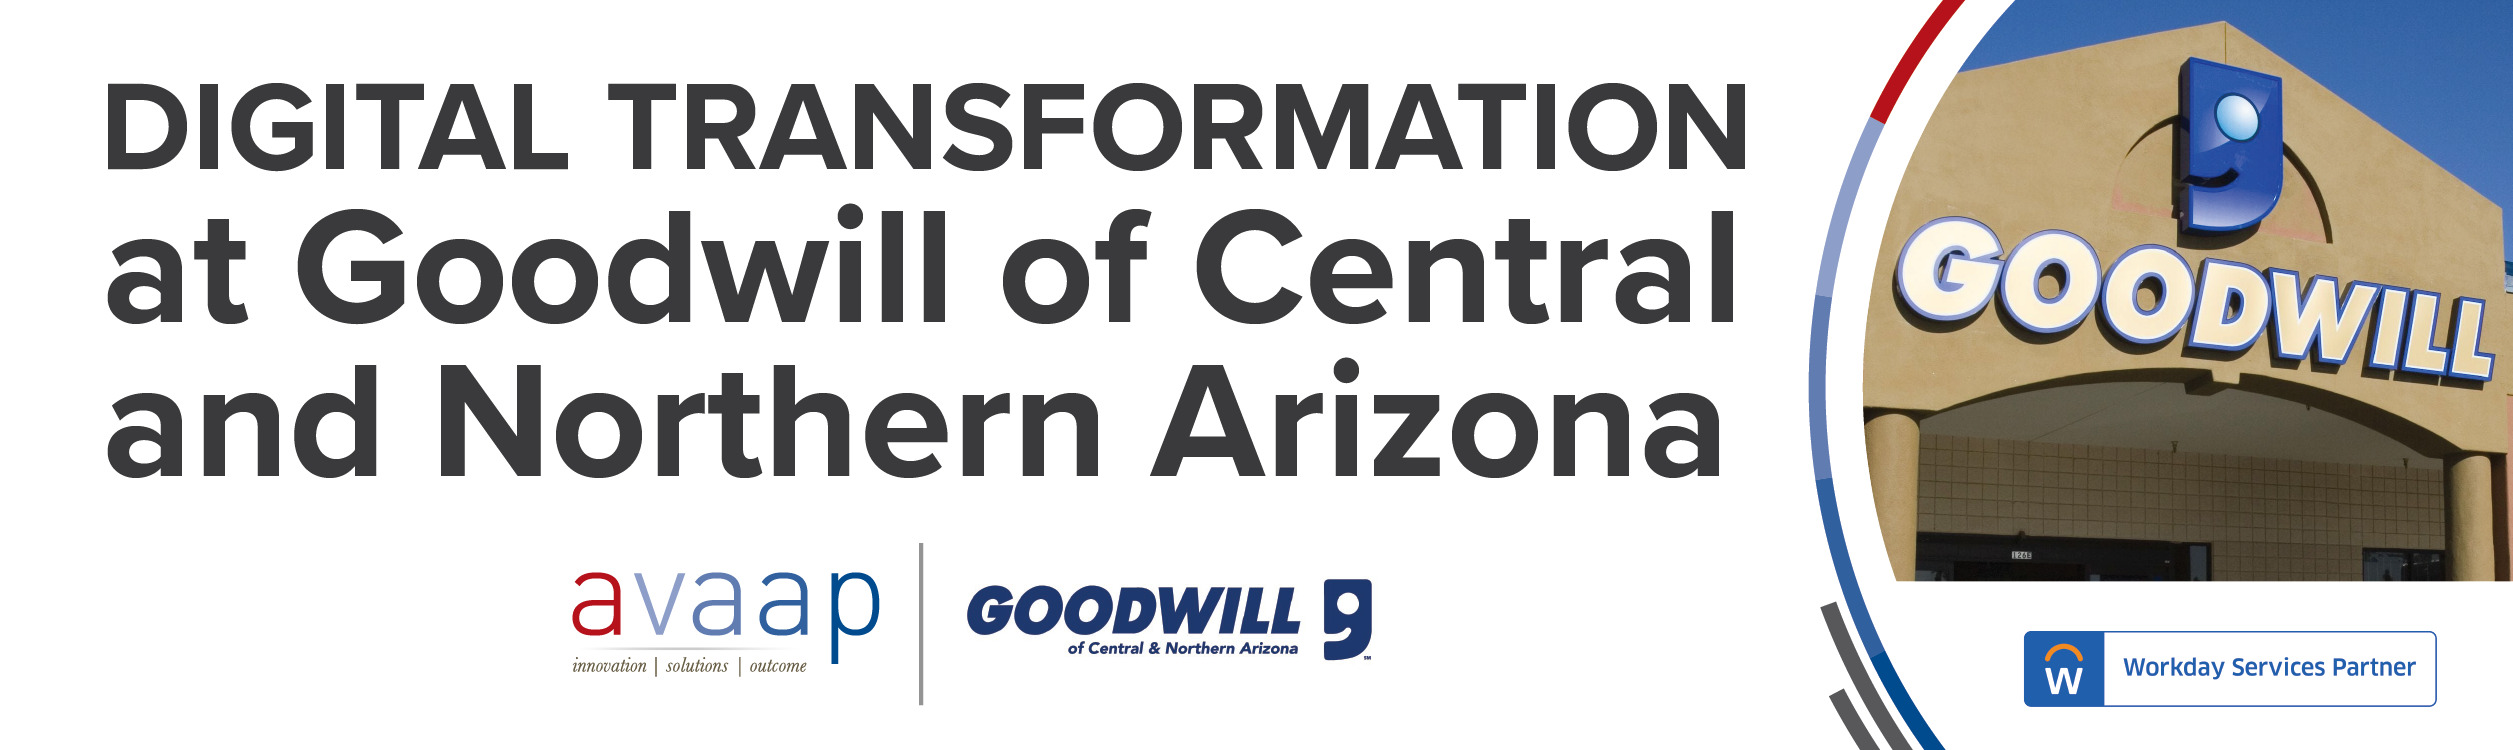 Digital Transformation at Goodwill of Central and Northern Arizona